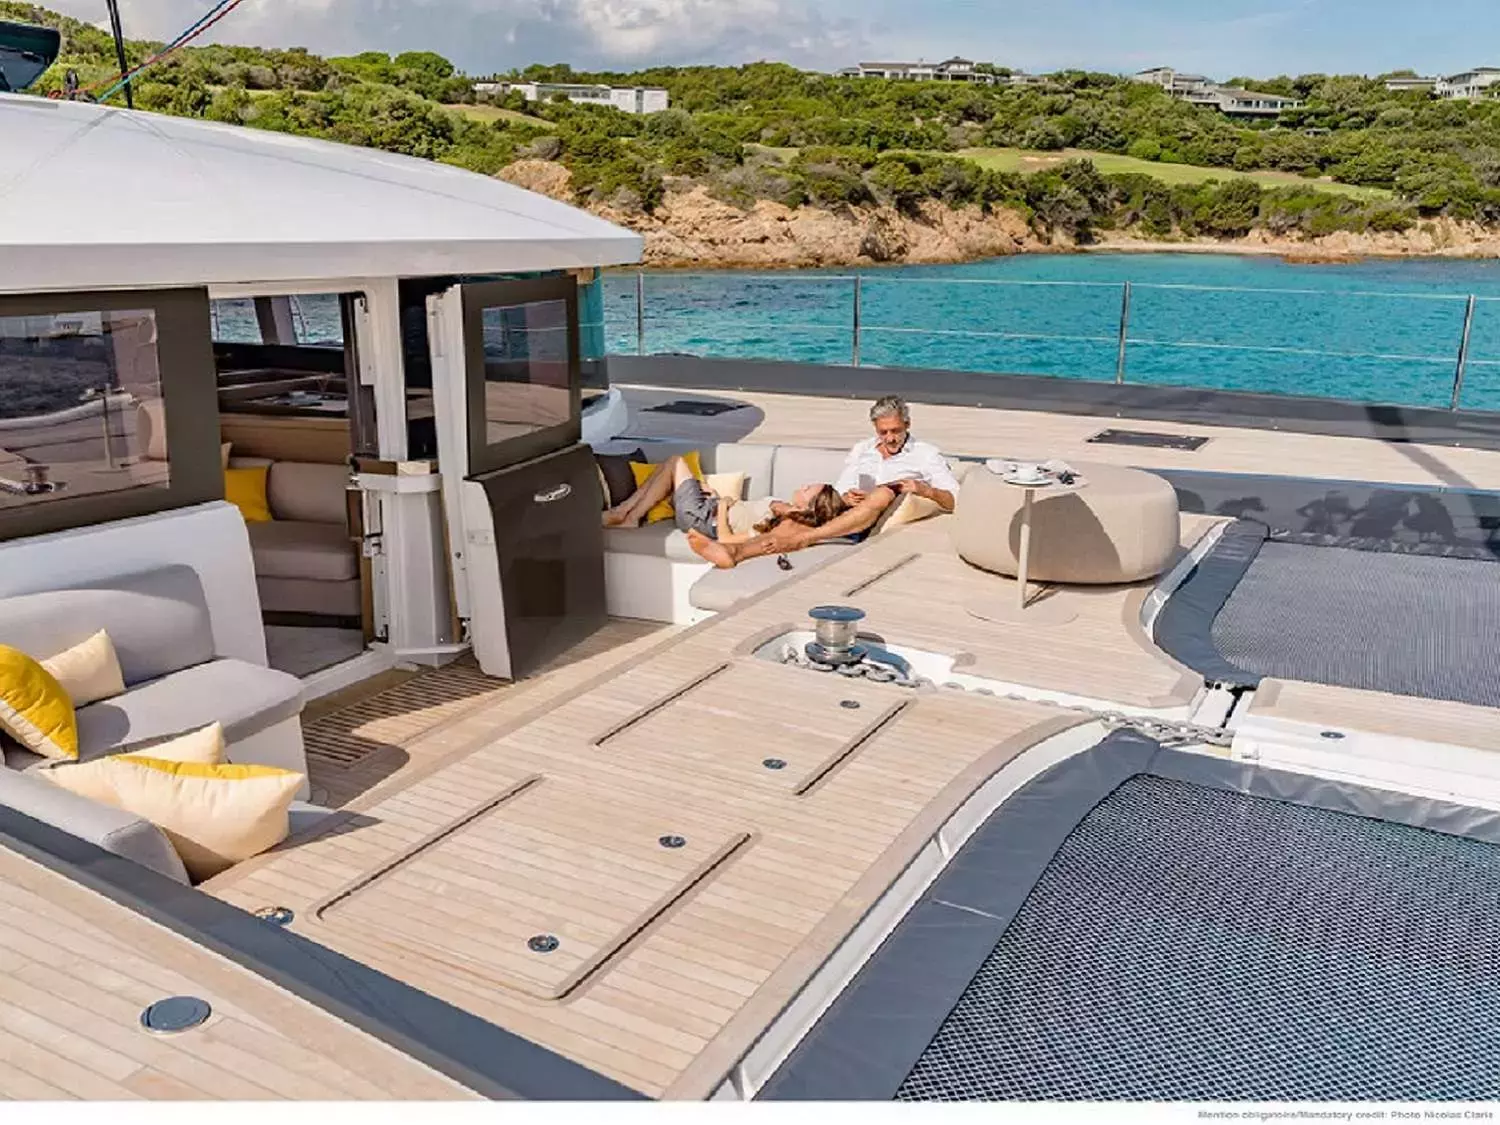 Kajikia by Lagoon - Special Offer for a private Luxury Catamaran Charter in Gaeta with a crew